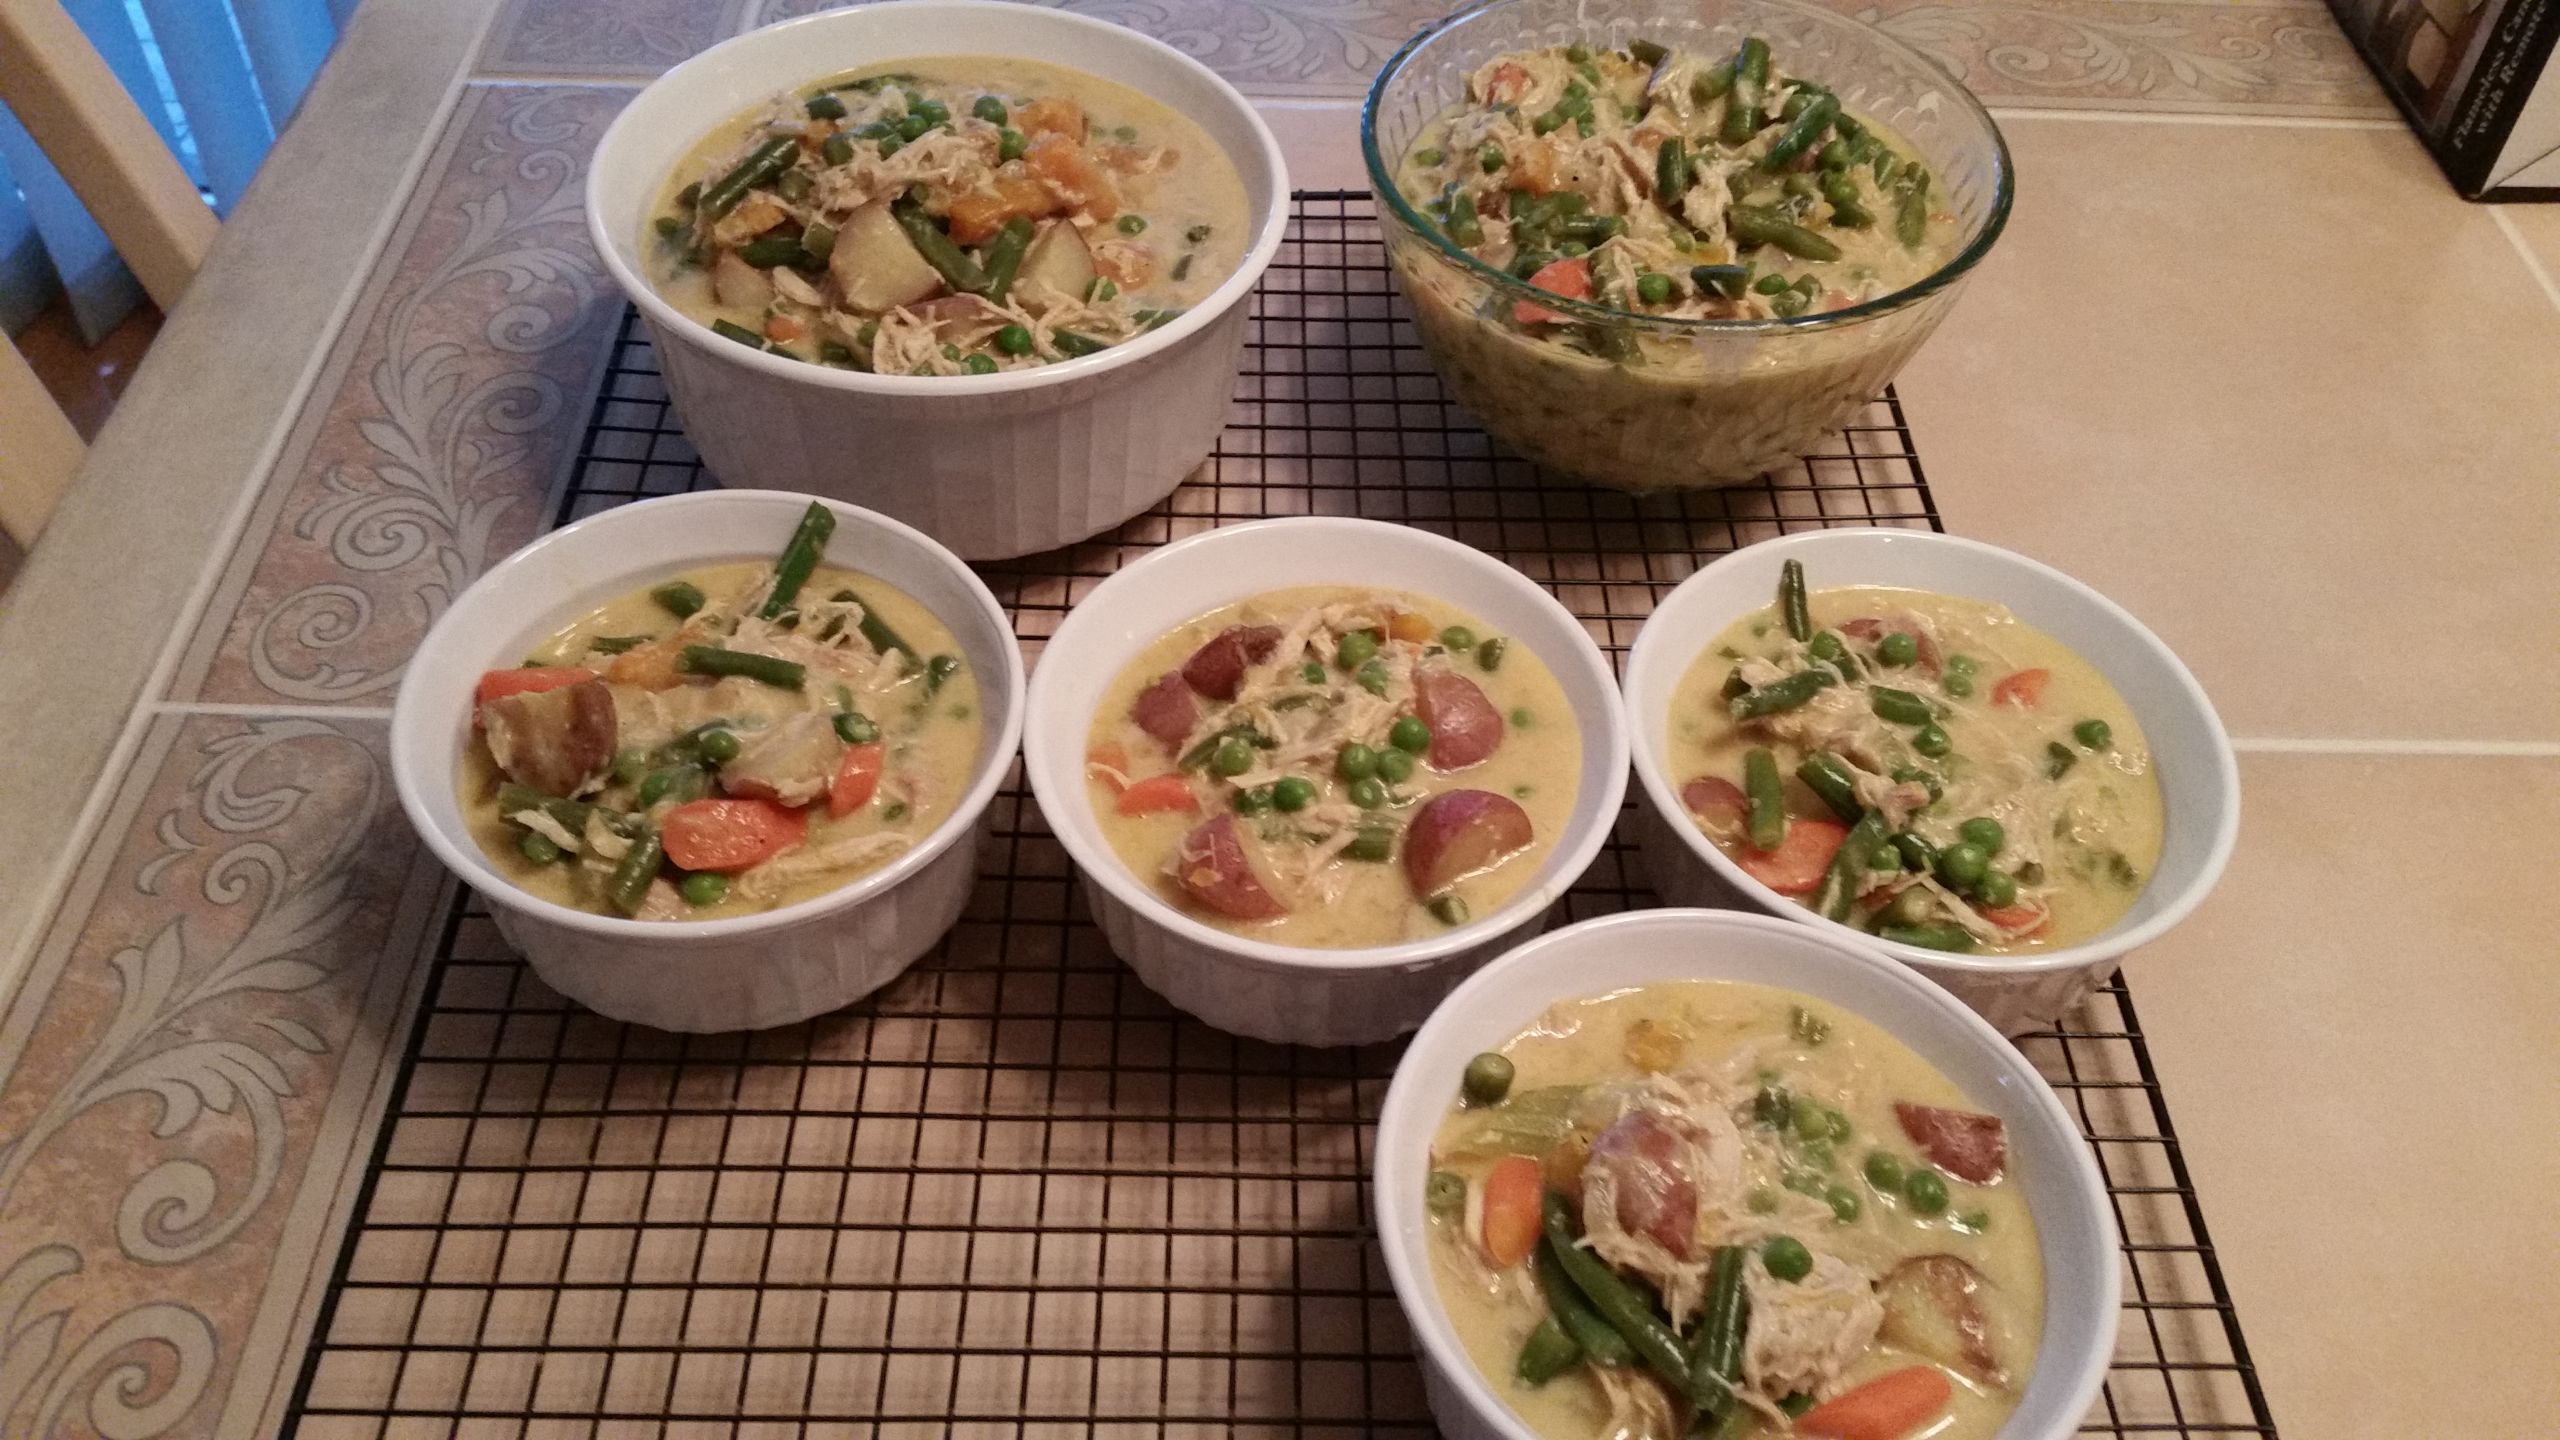 Make Ahead Chicken Pot Pie
 Make Ahead Creamy Chicken Pot Pie with Roasted Root